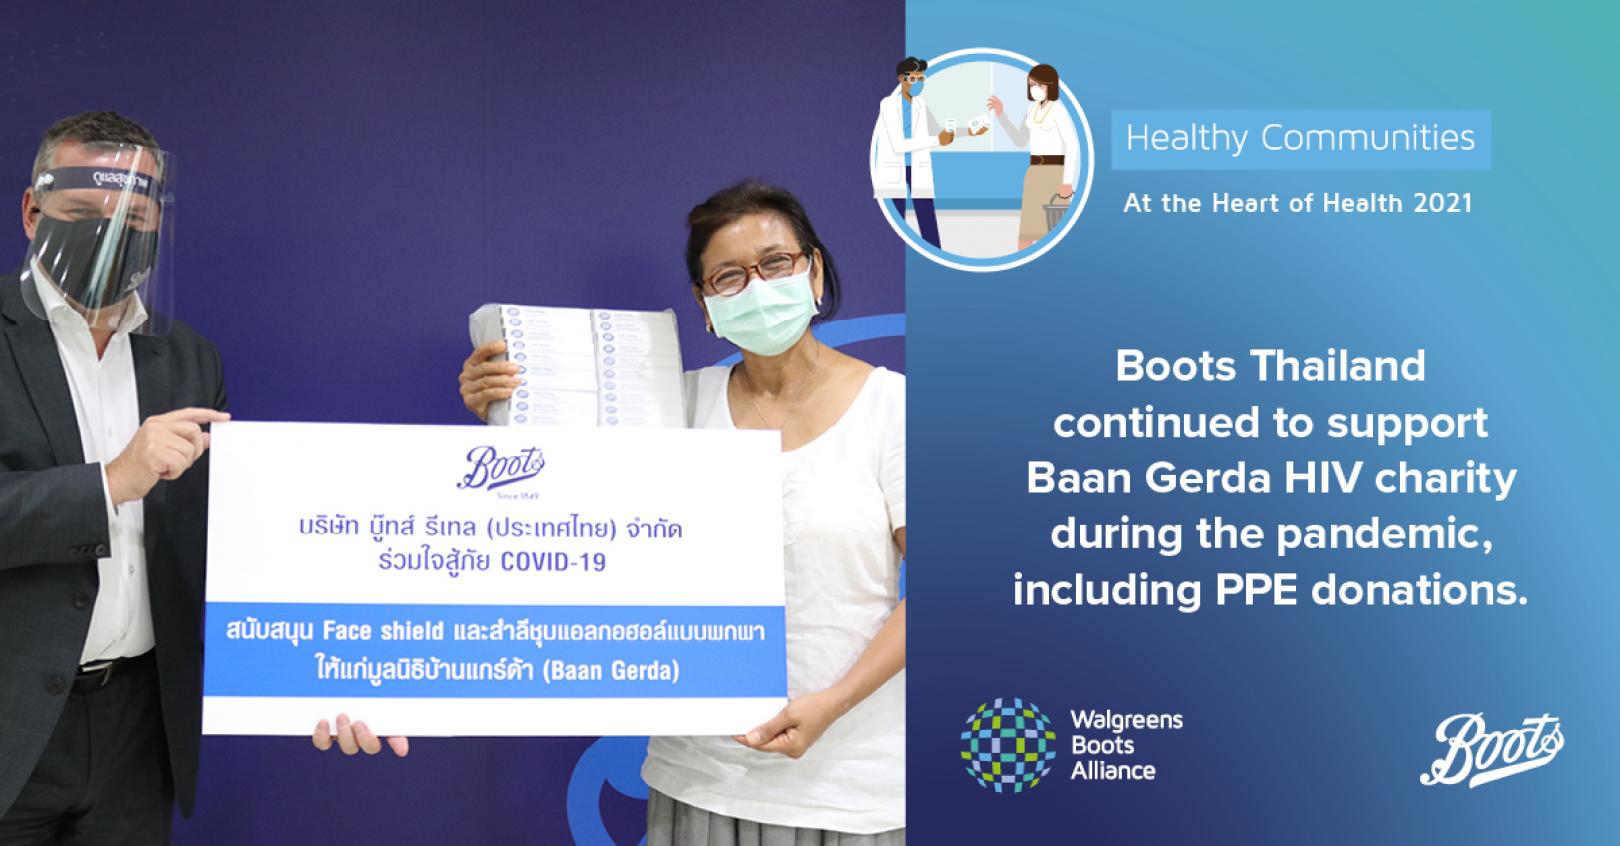 Boots Thailand donates PPE to HIV charity Baan Gerda Twitter LinkedIn